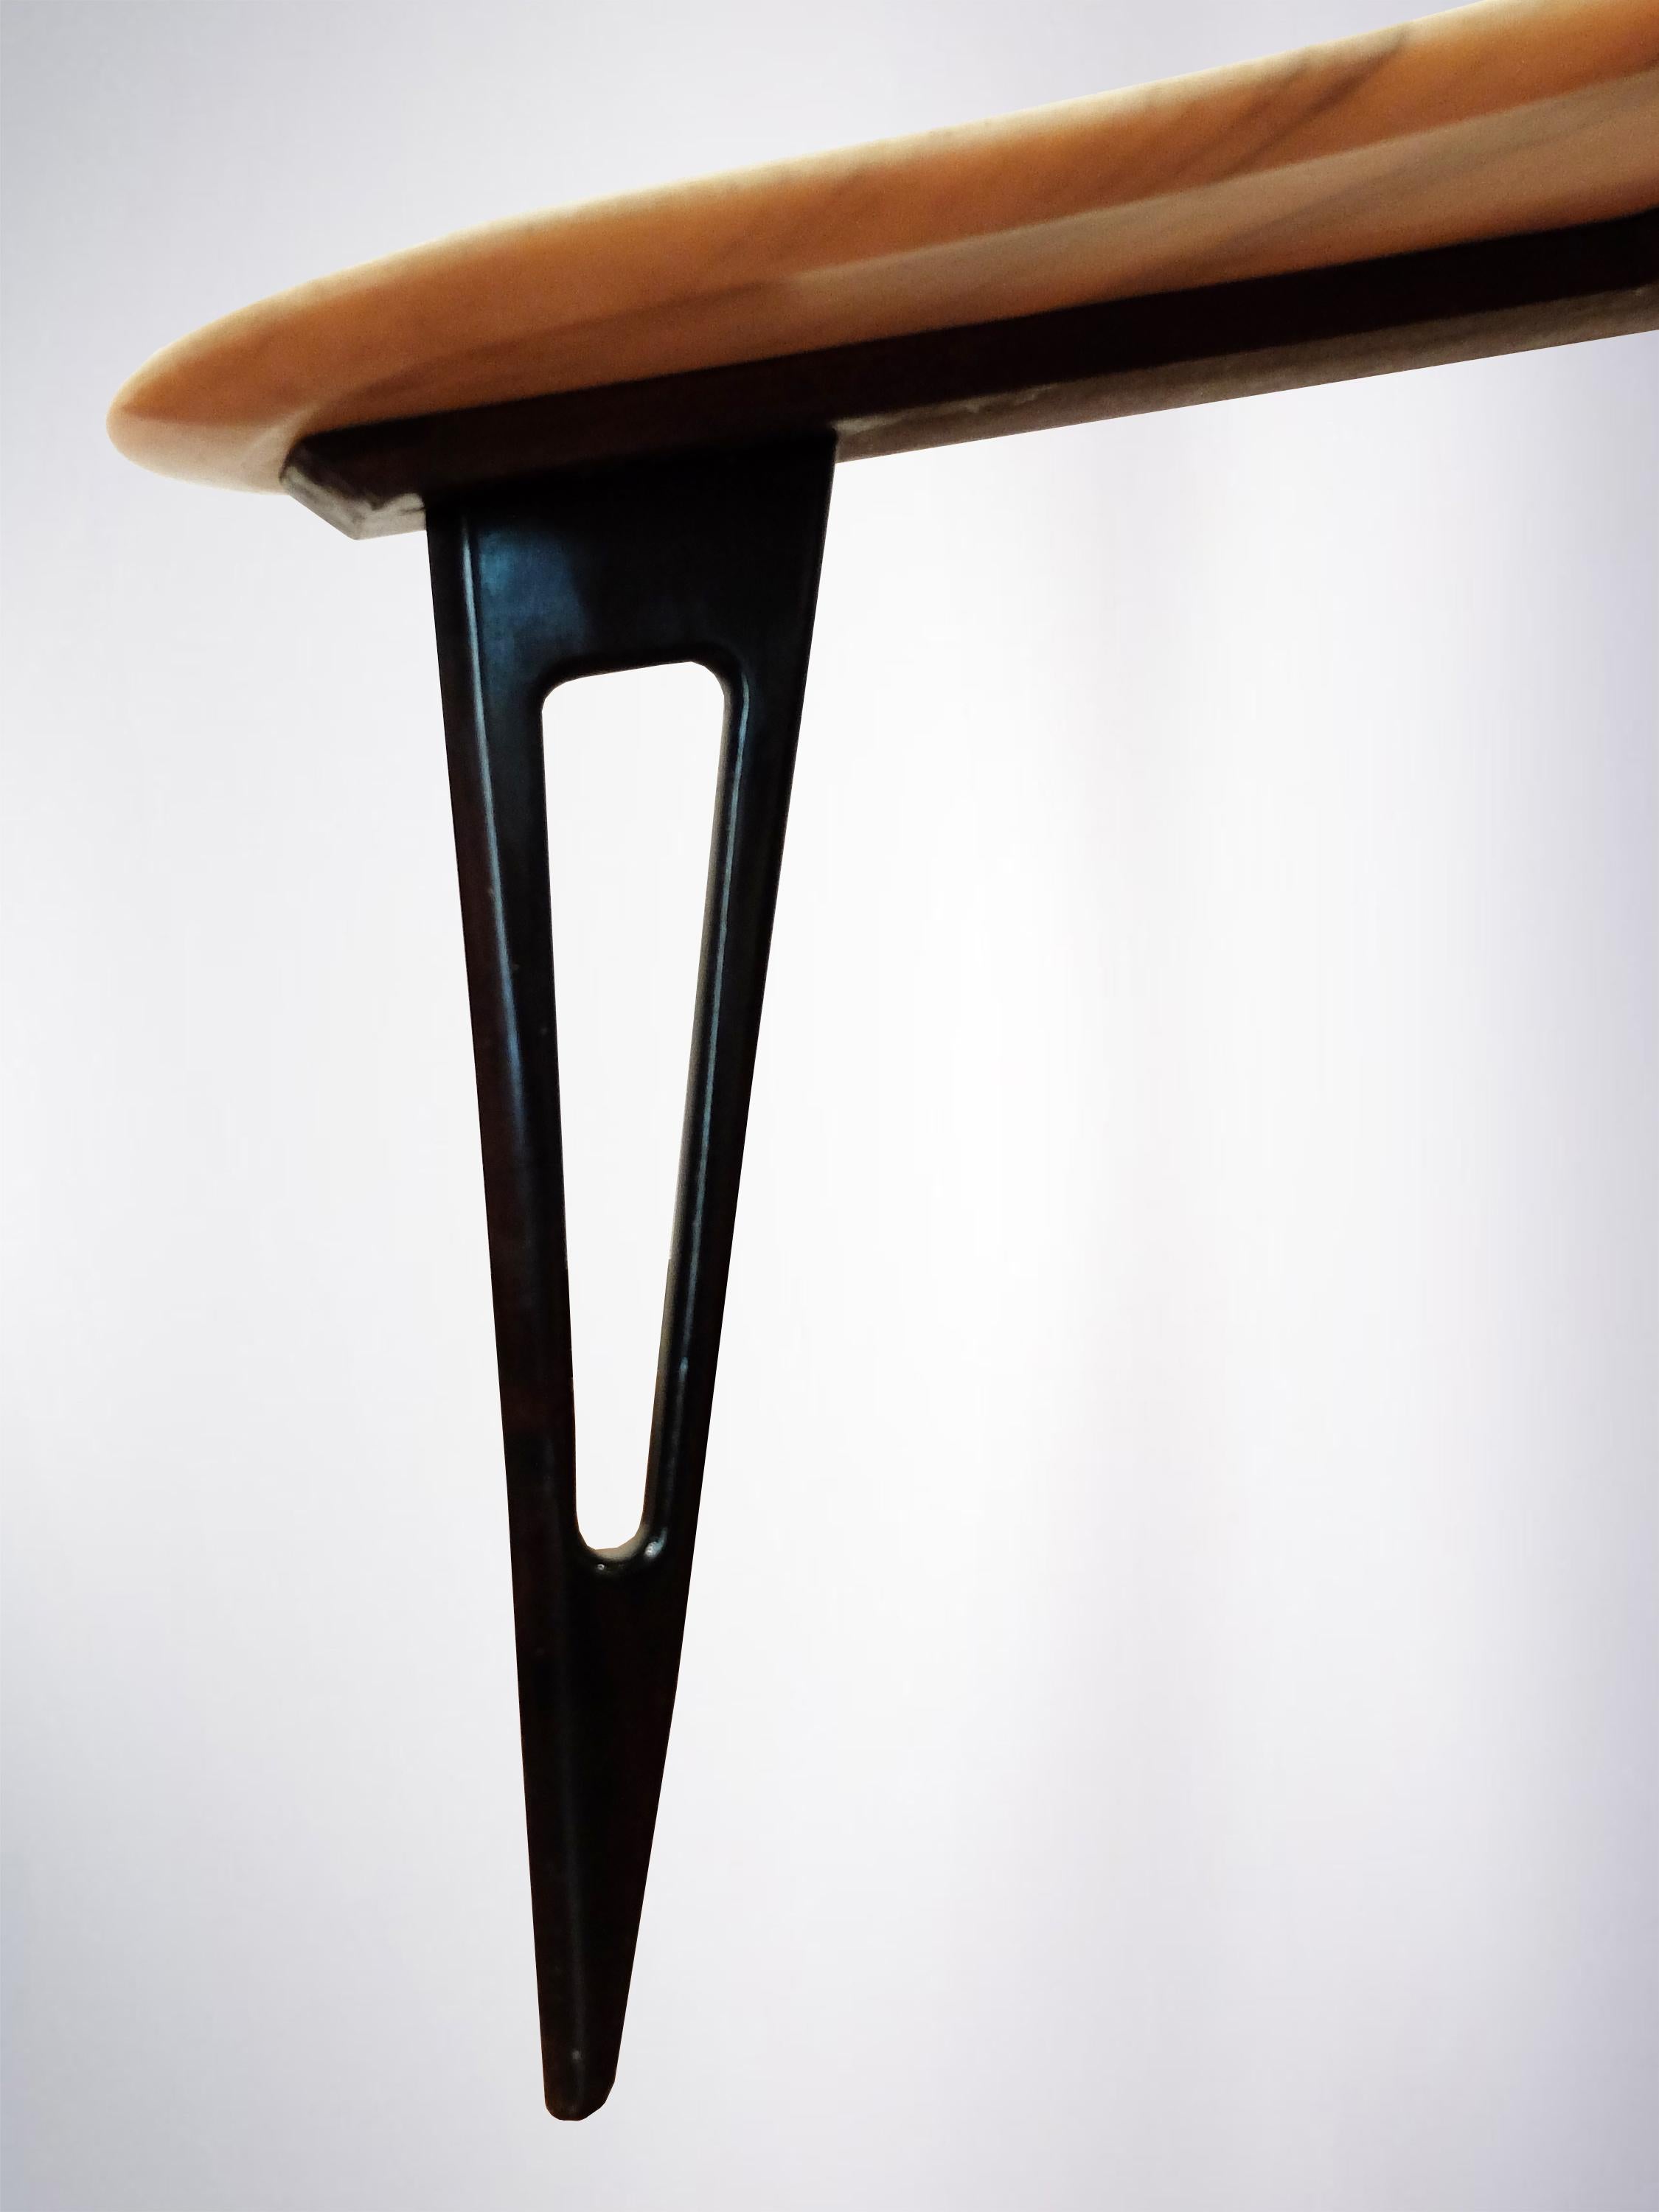 Ico Parisi, Italian Mid-Century Modern Side Table in Marble and Mahogany, 1950 For Sale 1